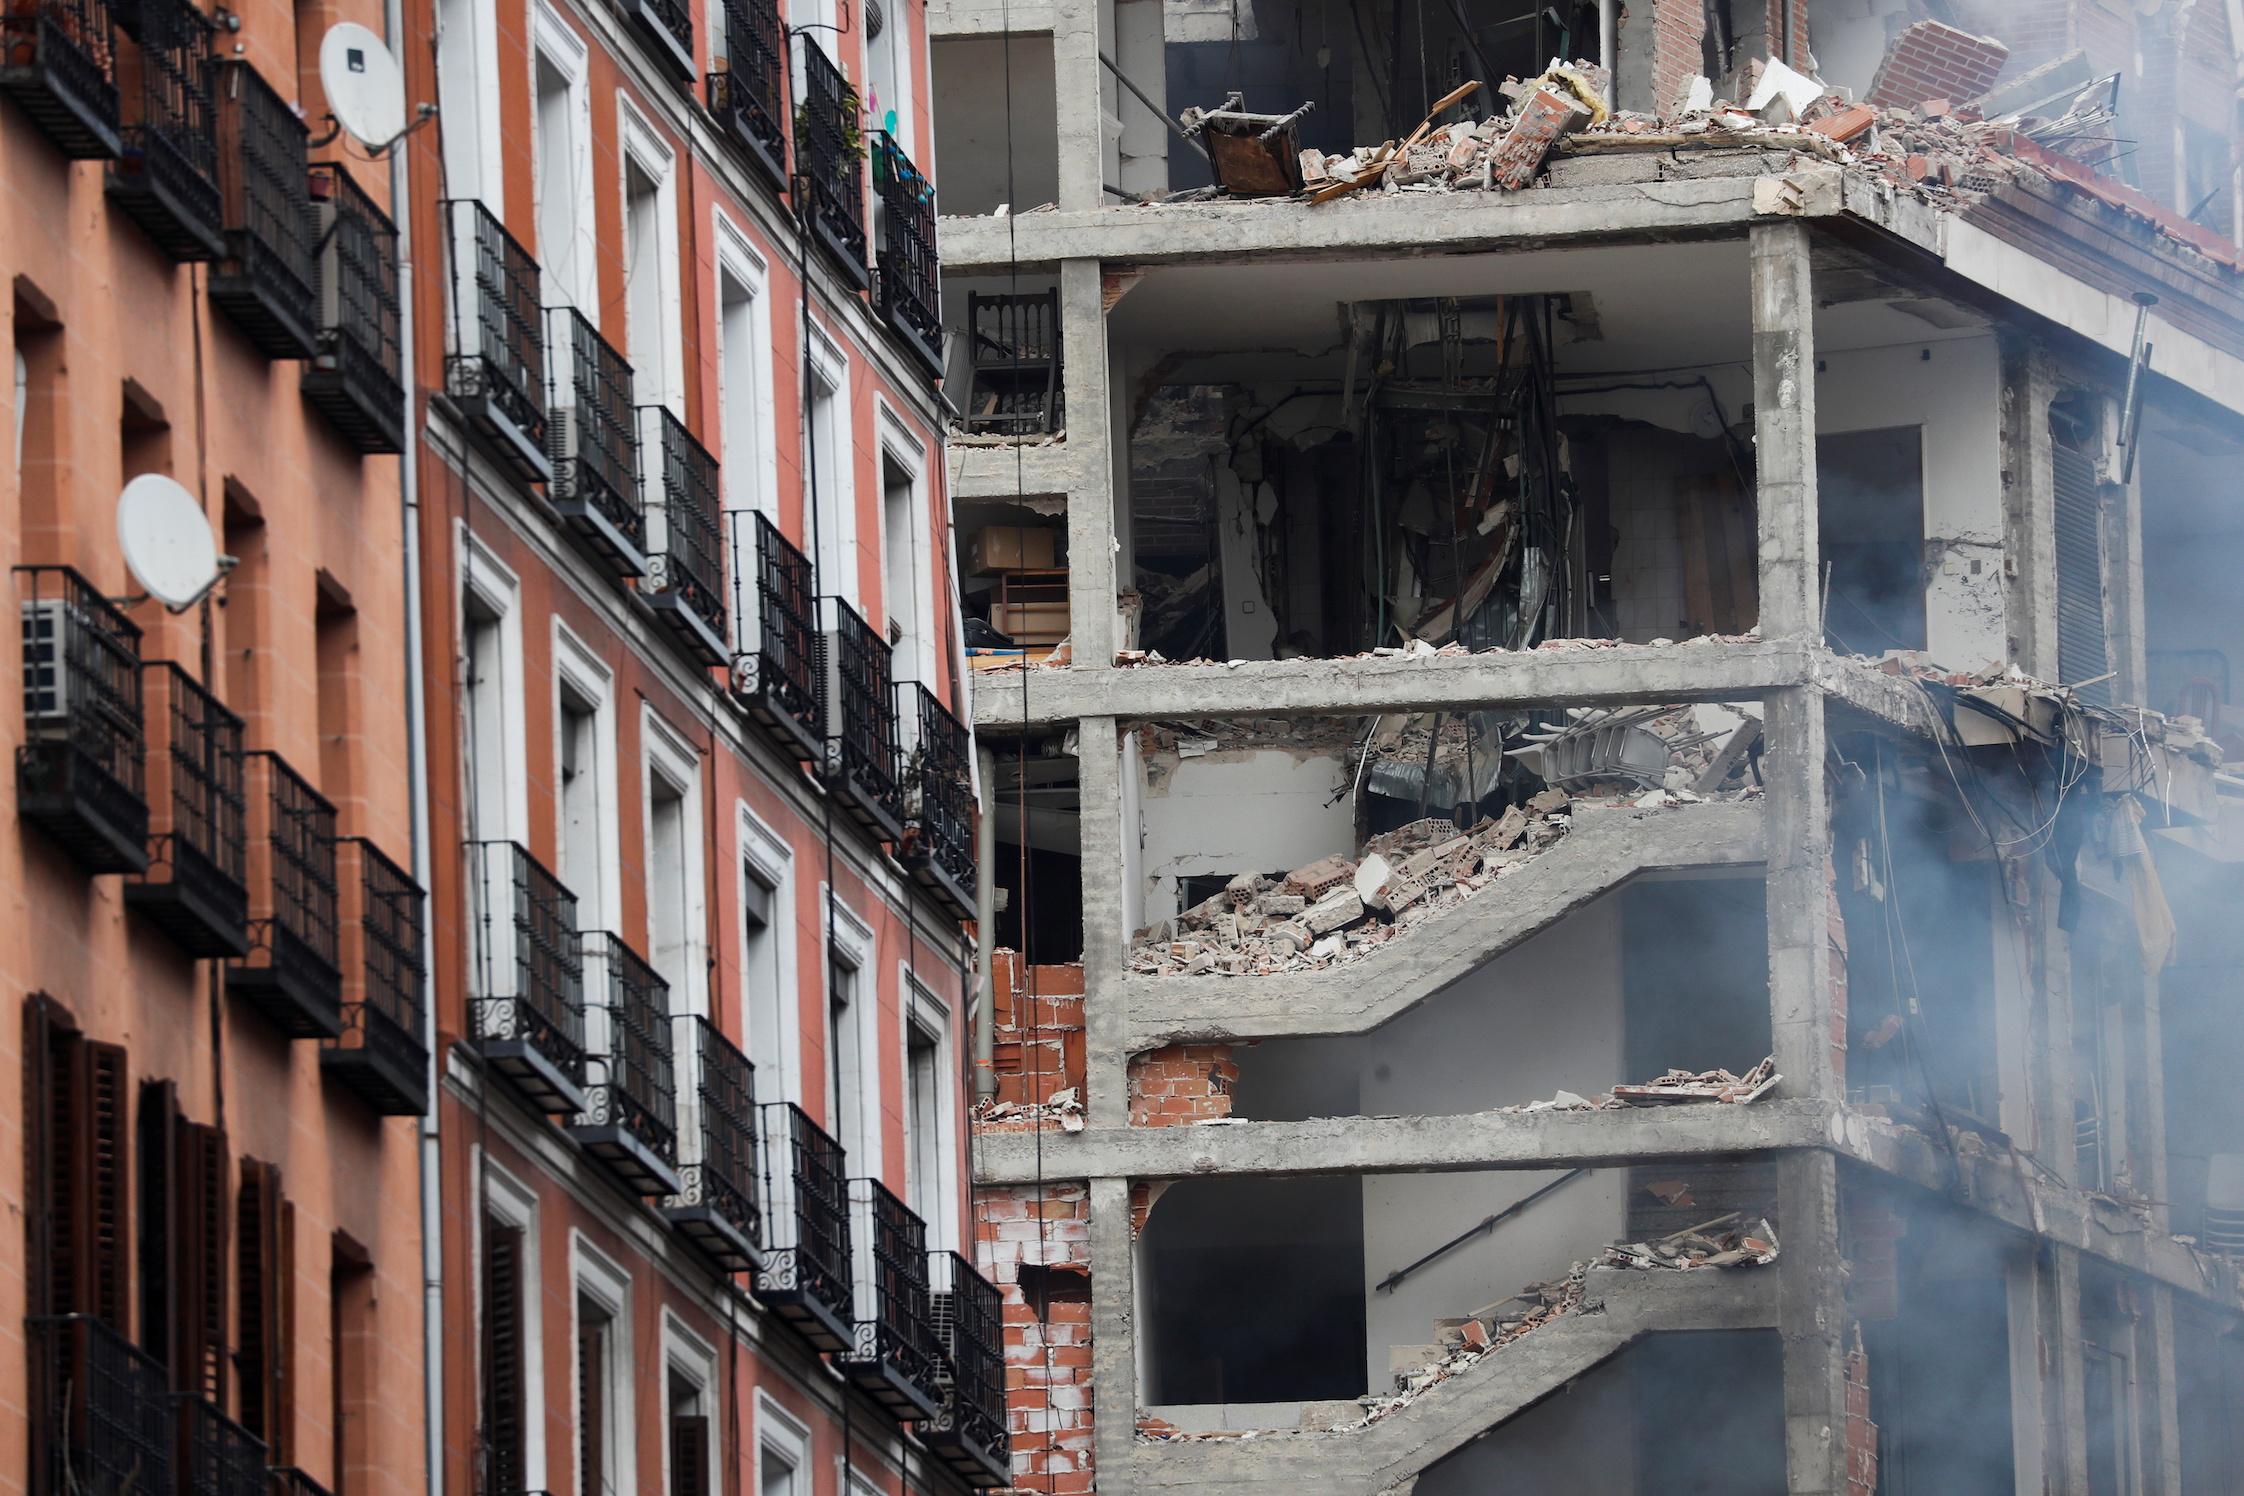 At Least Two Dead After Blast Wrecks Building In Central Madrid